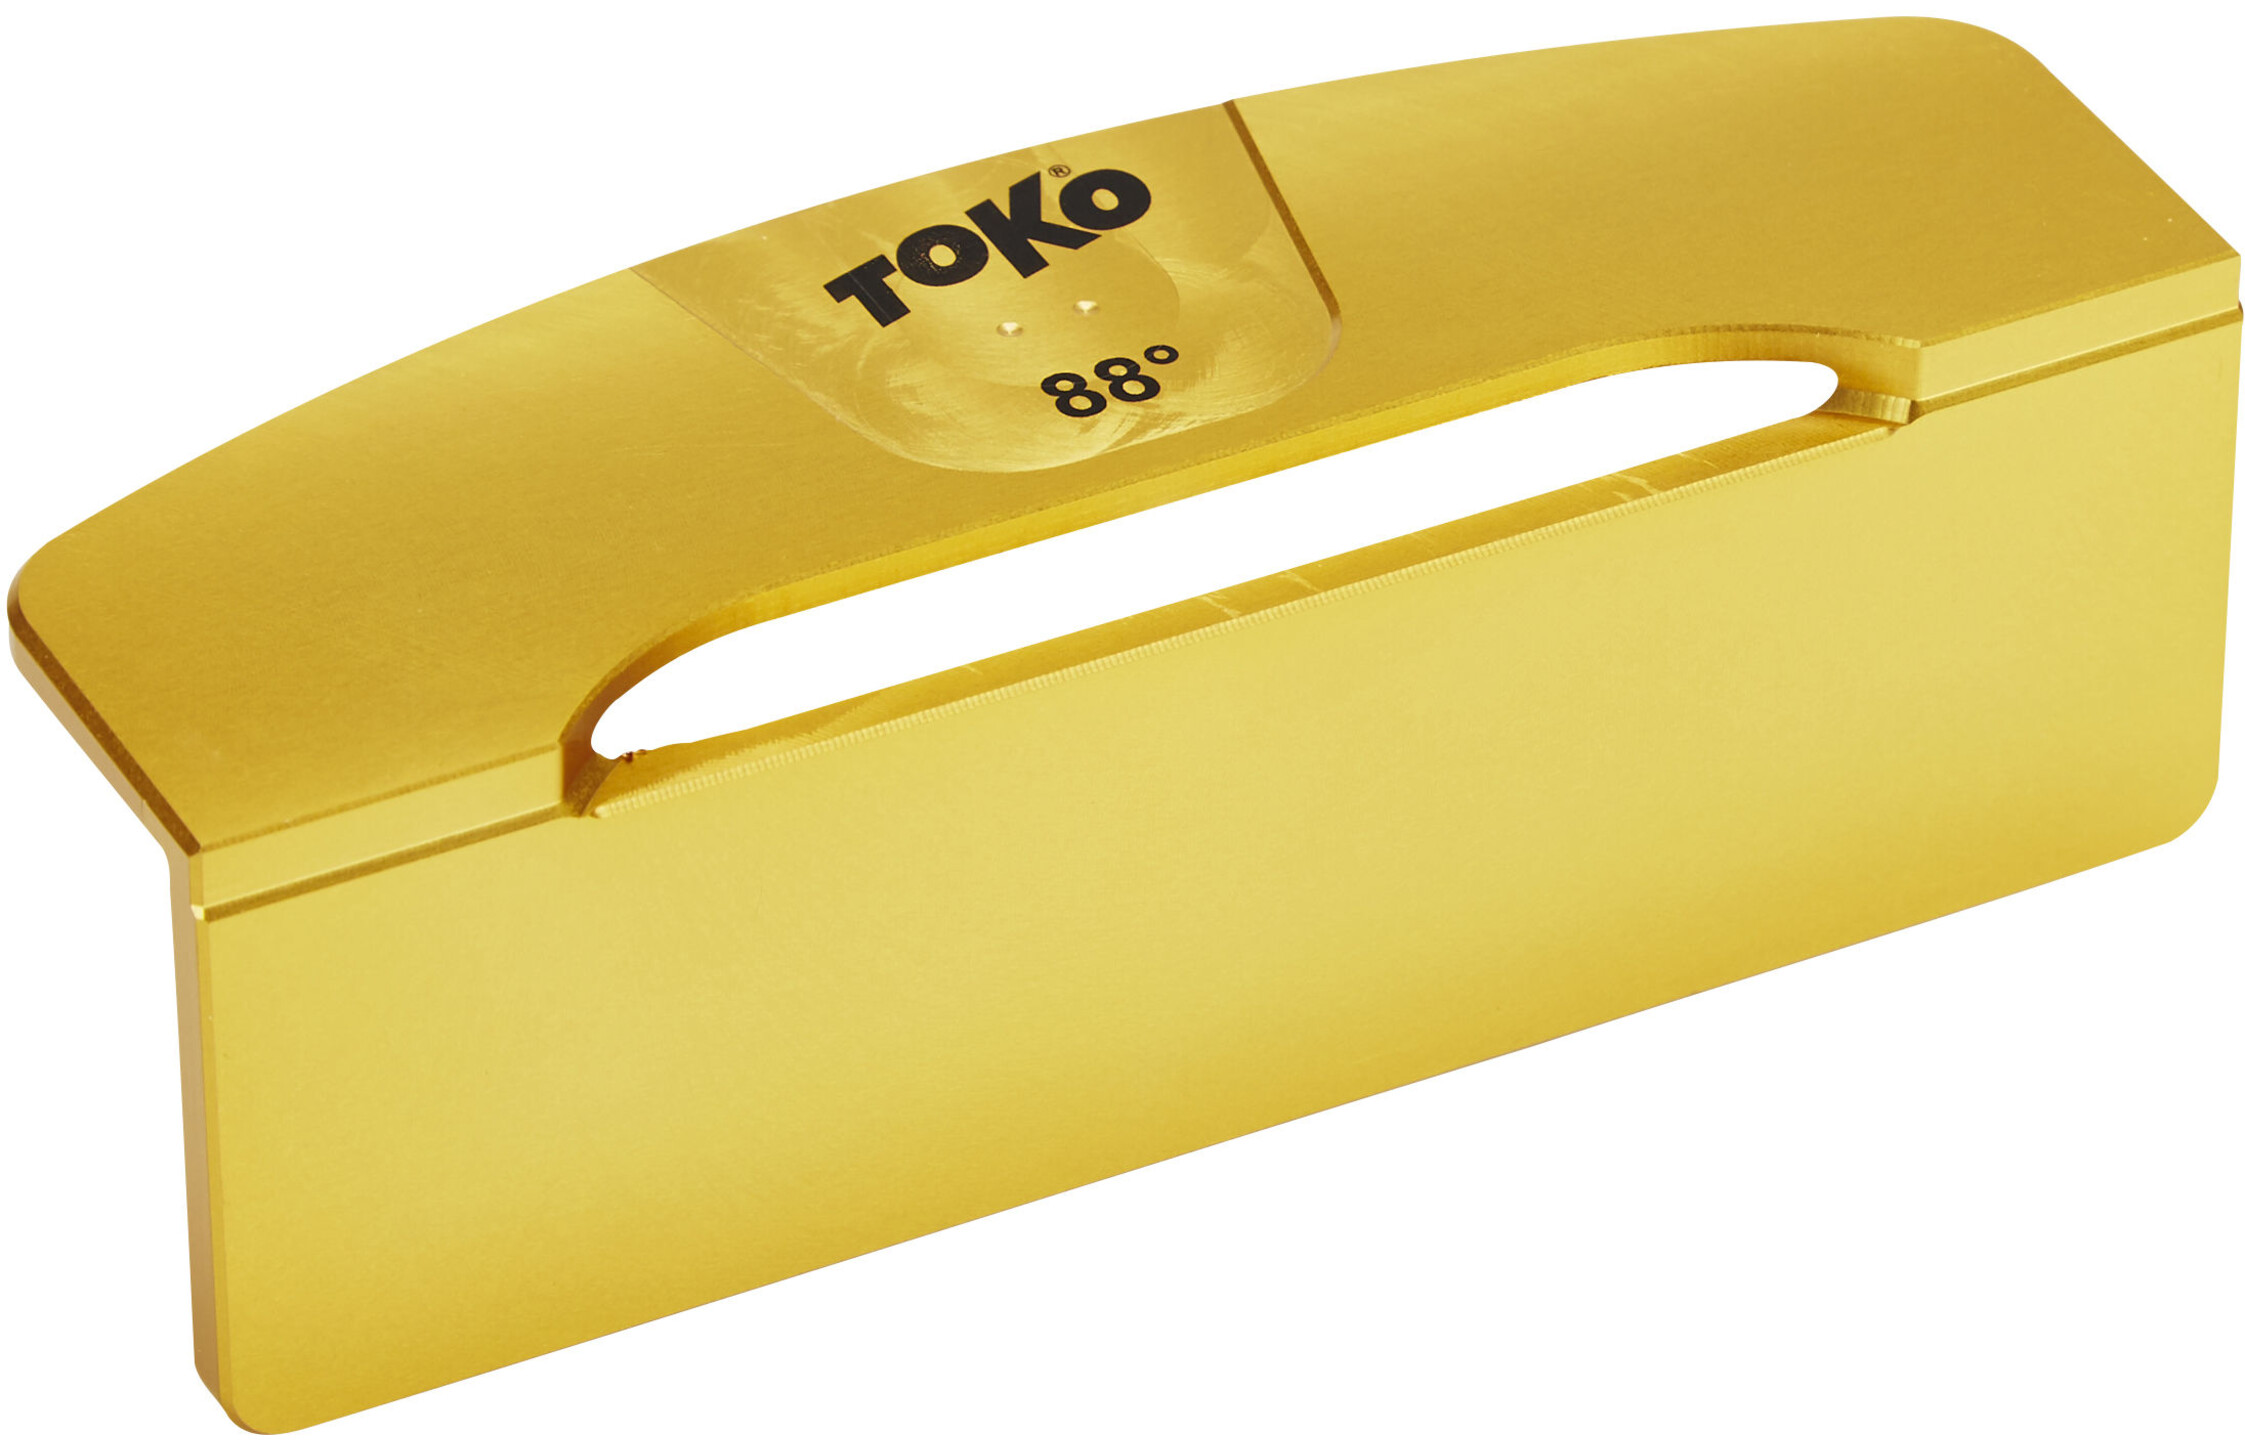 Toko Side Angle World Cup 88° | campz.ch